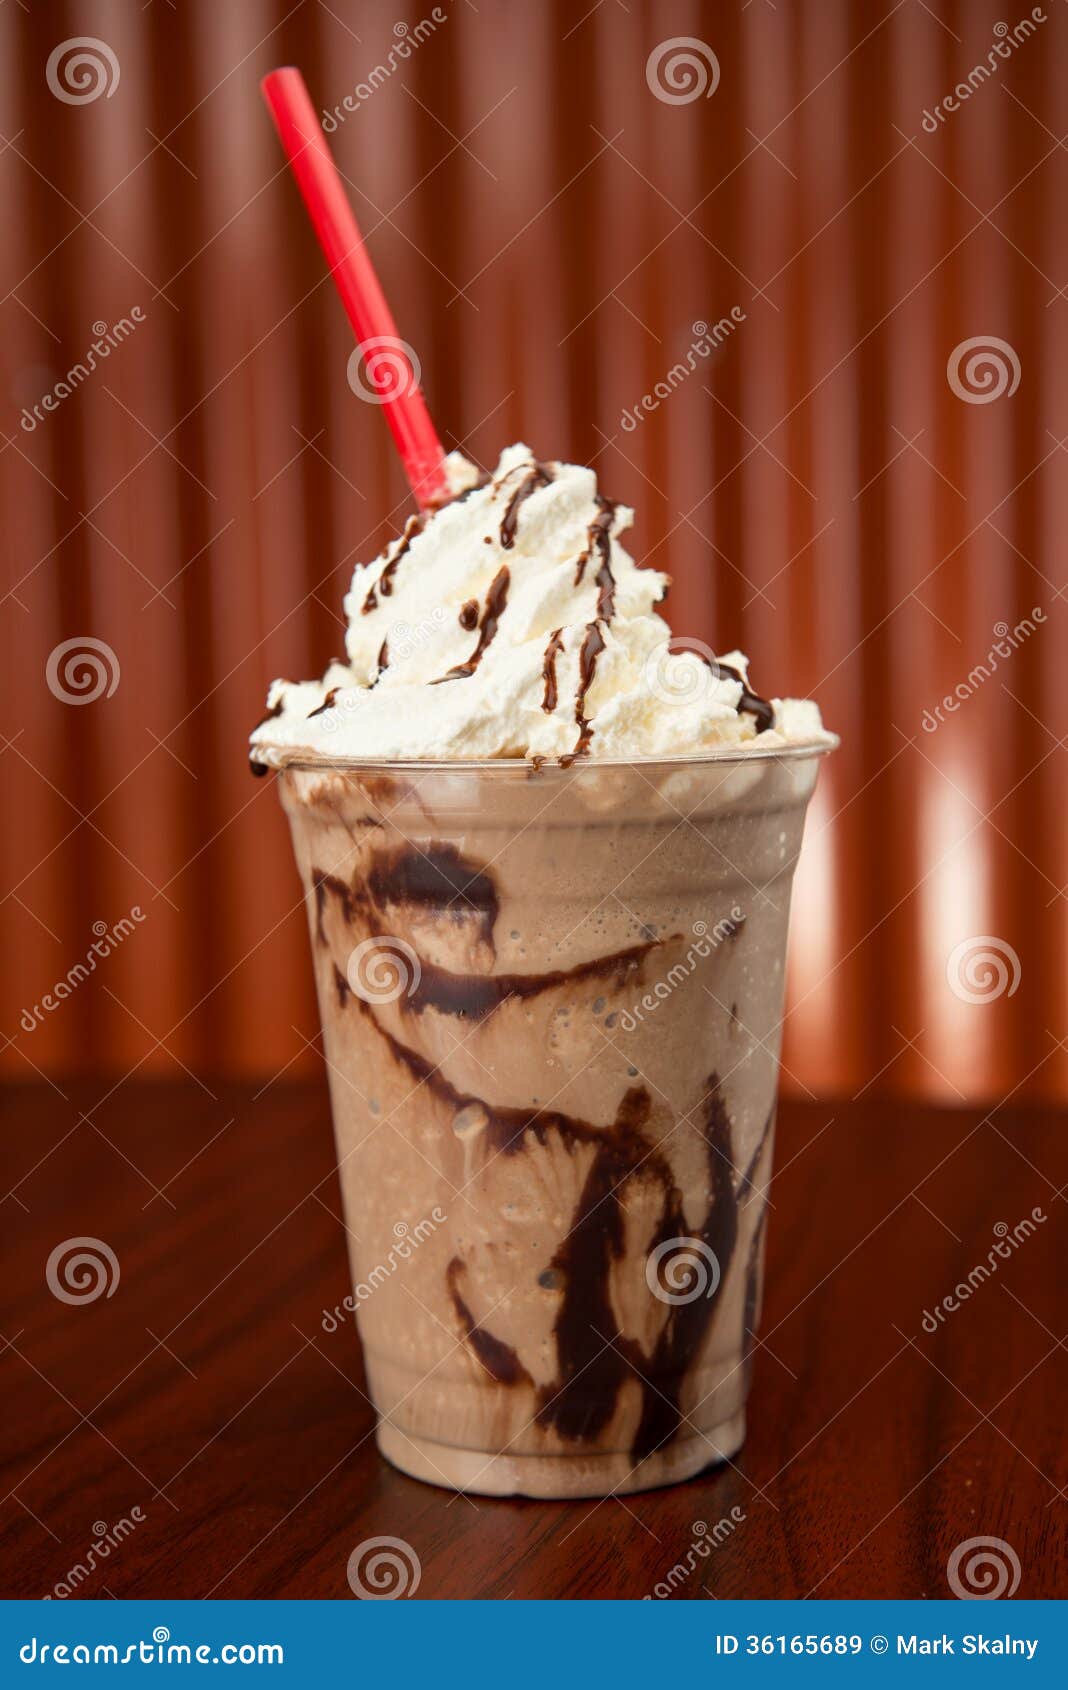 https://thumbs.dreamstime.com/z/chocolate-milkshake-plastic-cup-topped-whipped-cream-red-straw-wood-table-corrugated-copper-wall-36165689.jpg